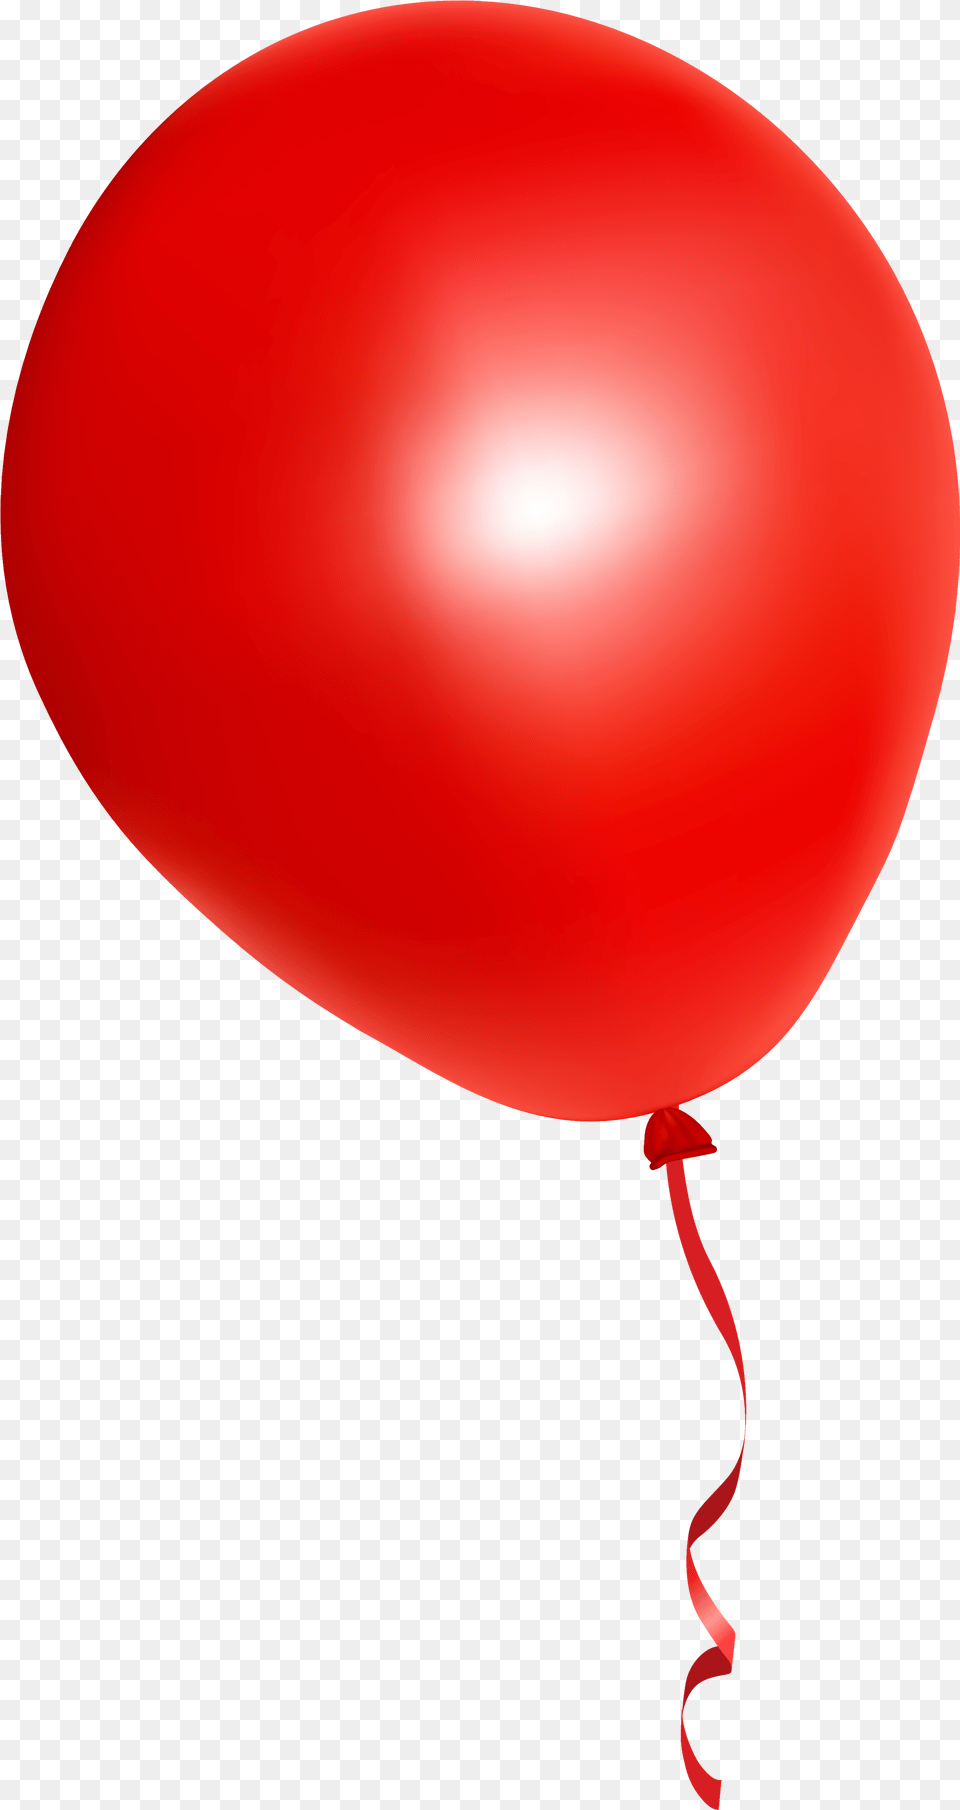 Result For Red Balloon Transparent Psycho Cinema Free Png